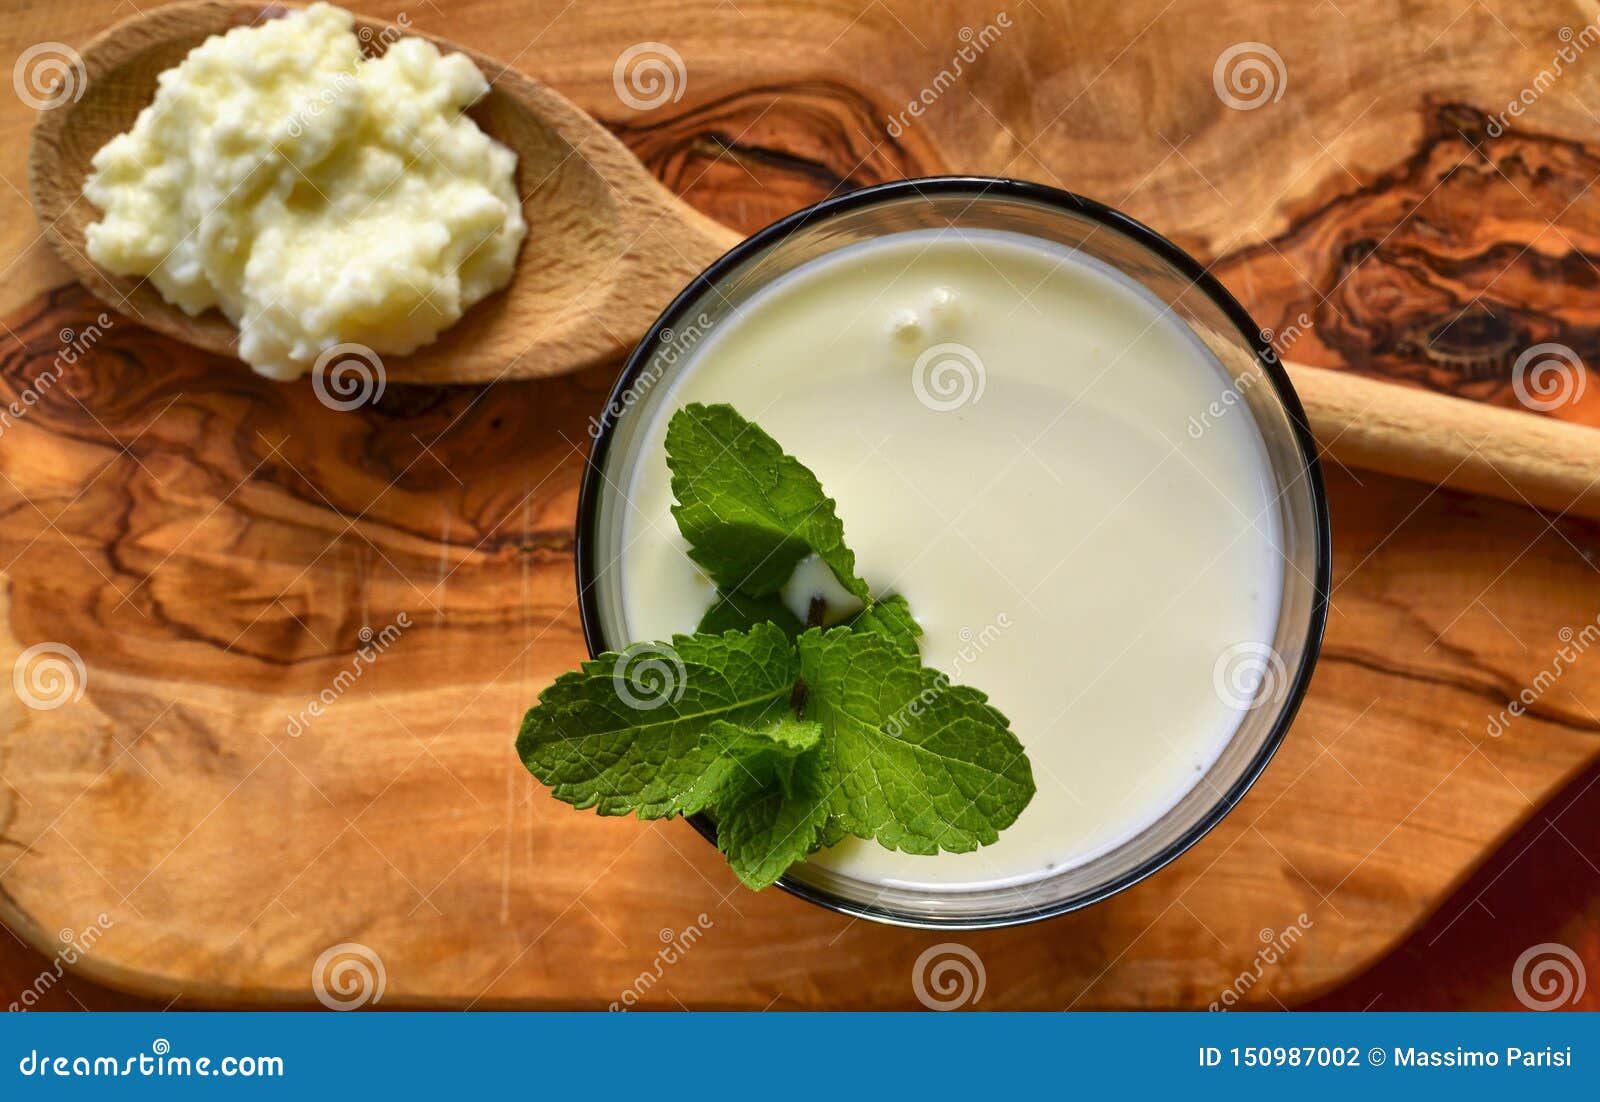 kefir enriched with some mint leaves